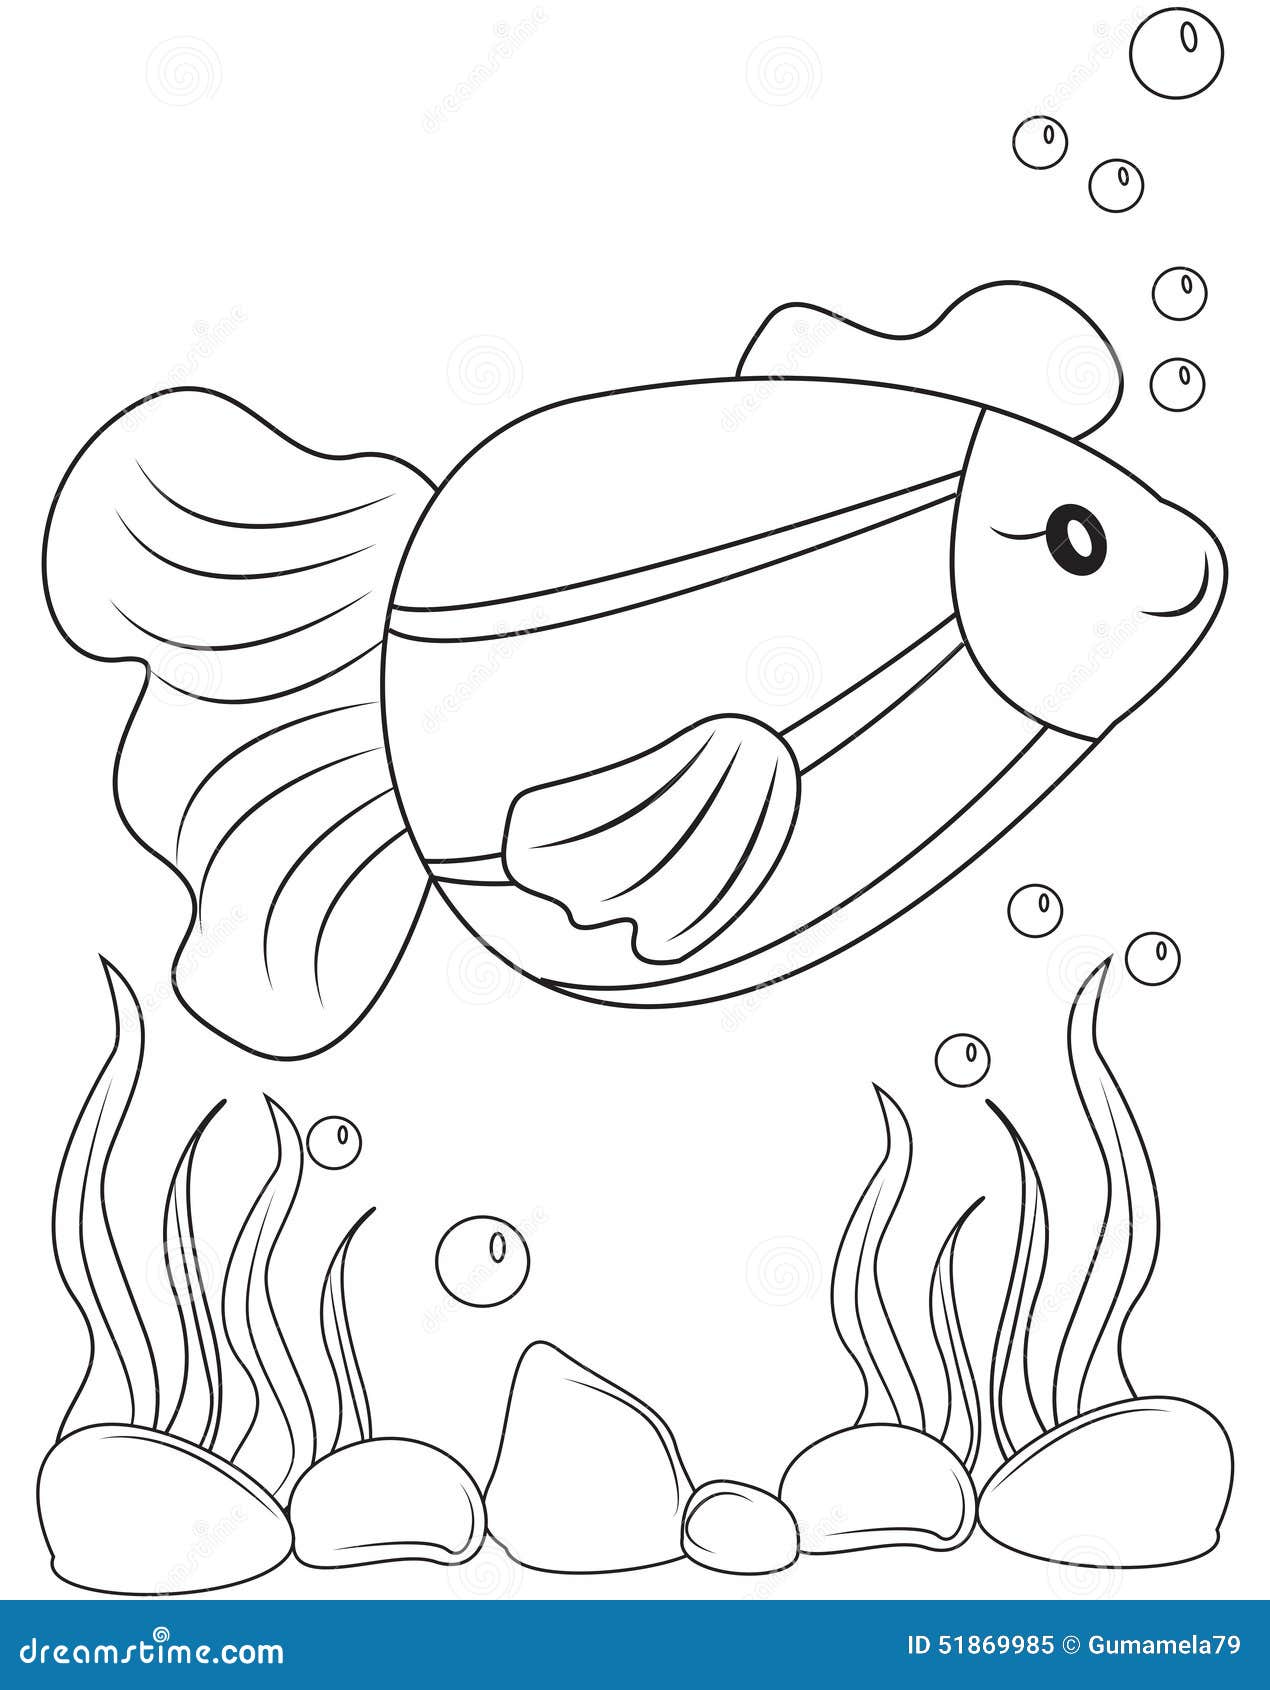 Fish Coloring Page Stock Illustration - Image: 51869985